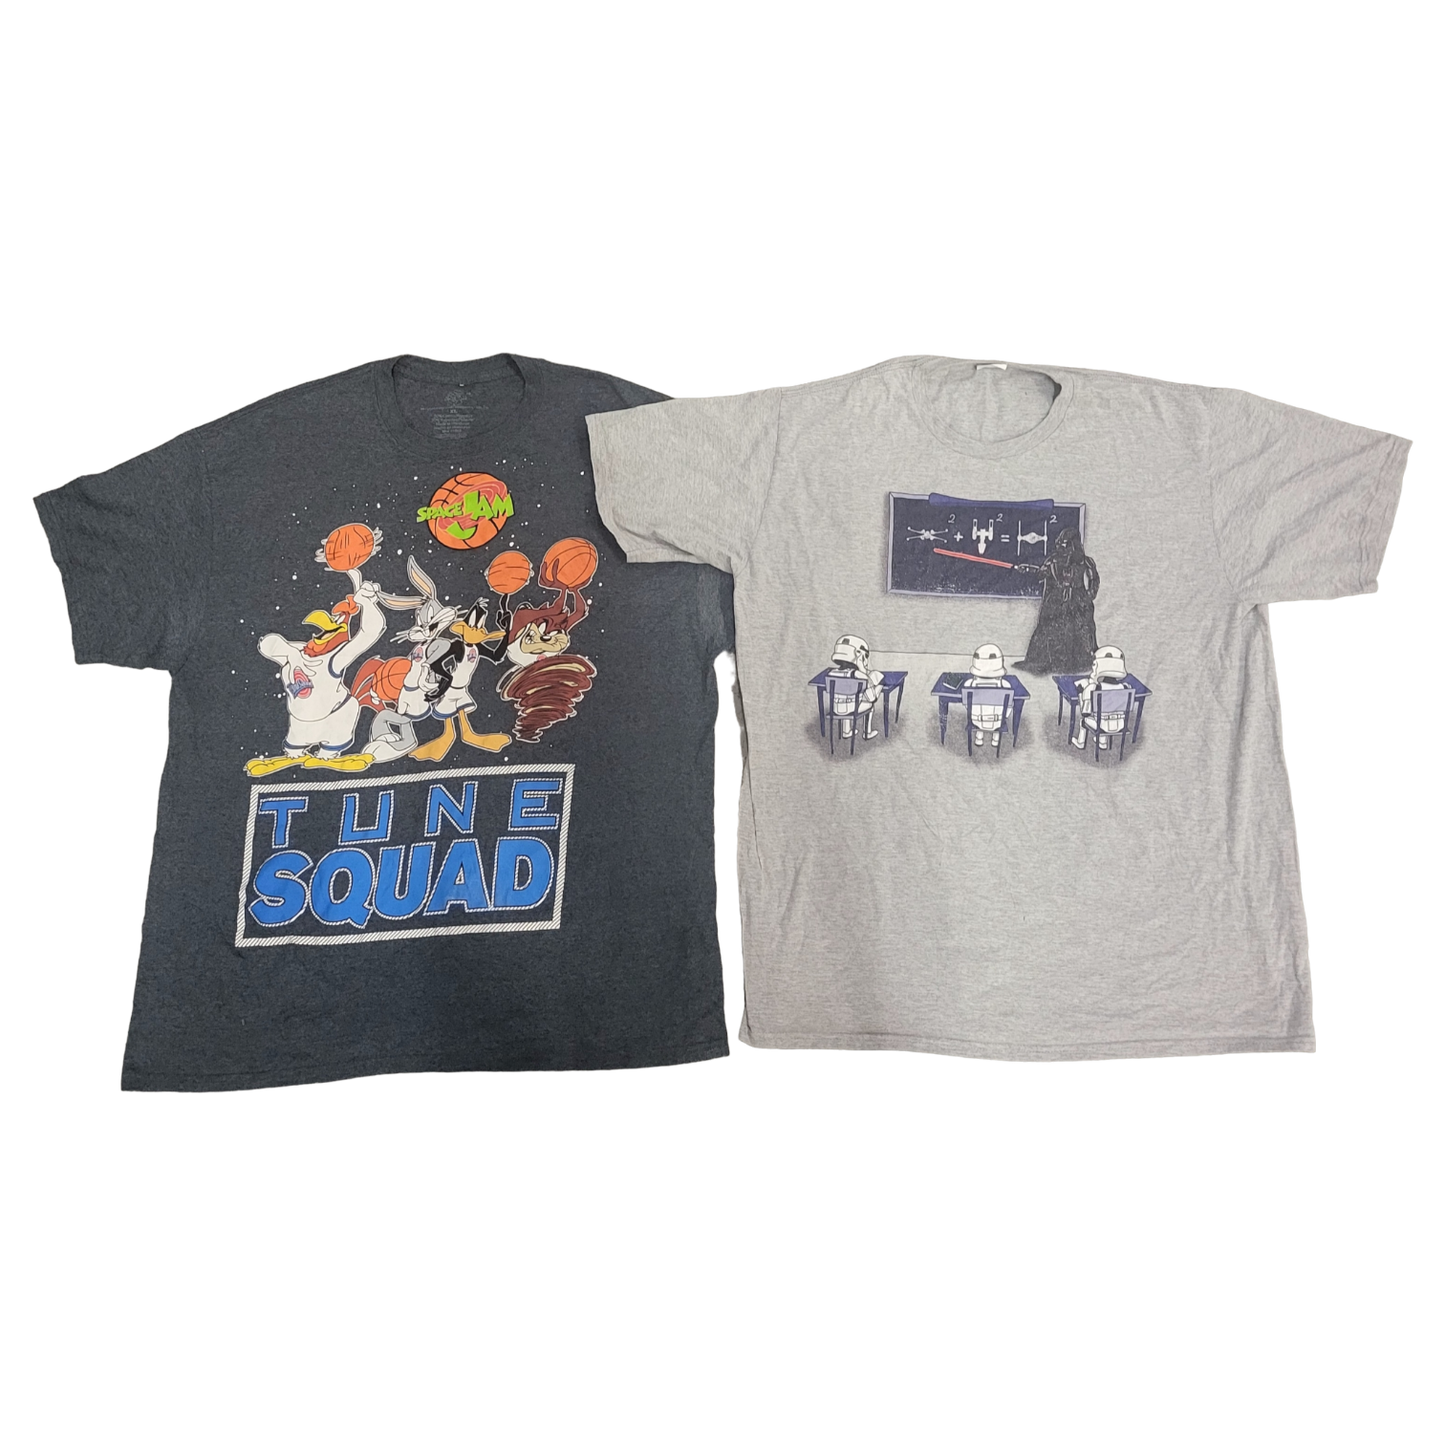 TV & Movies T-Shirts Intro Pack